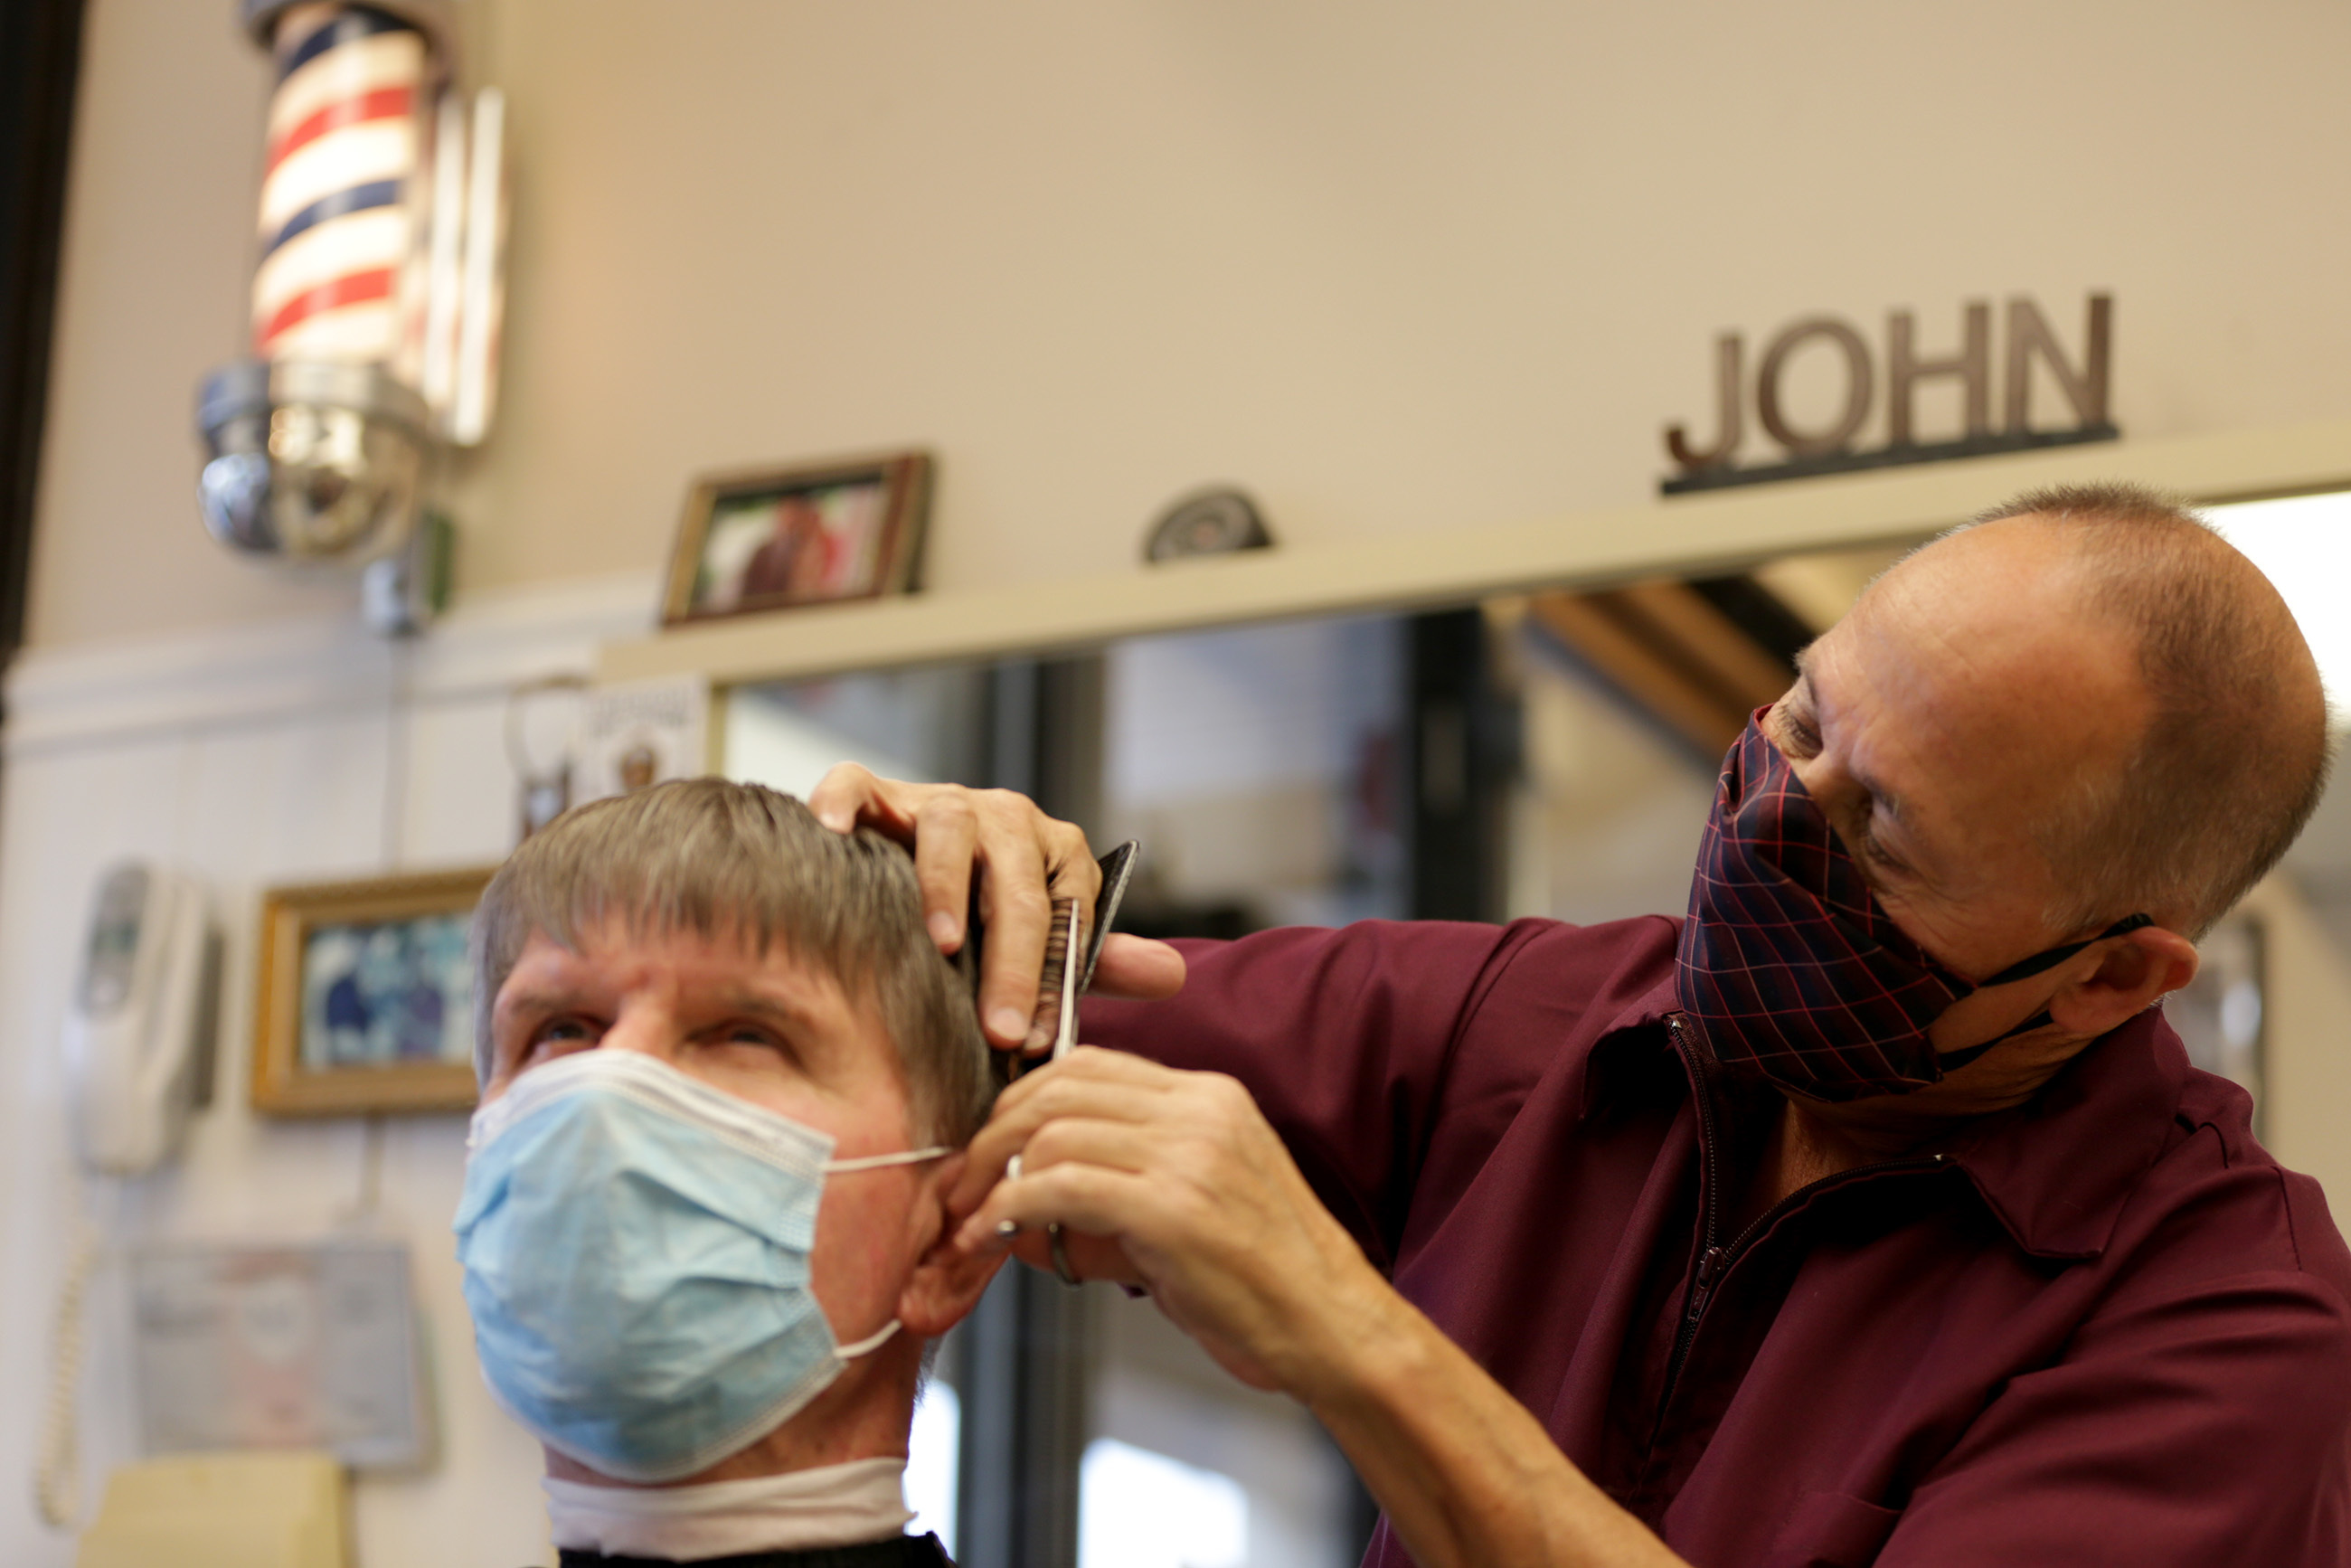 A Barber's Deal In Hartford: Get A COVID Shot, And The Haircut Is